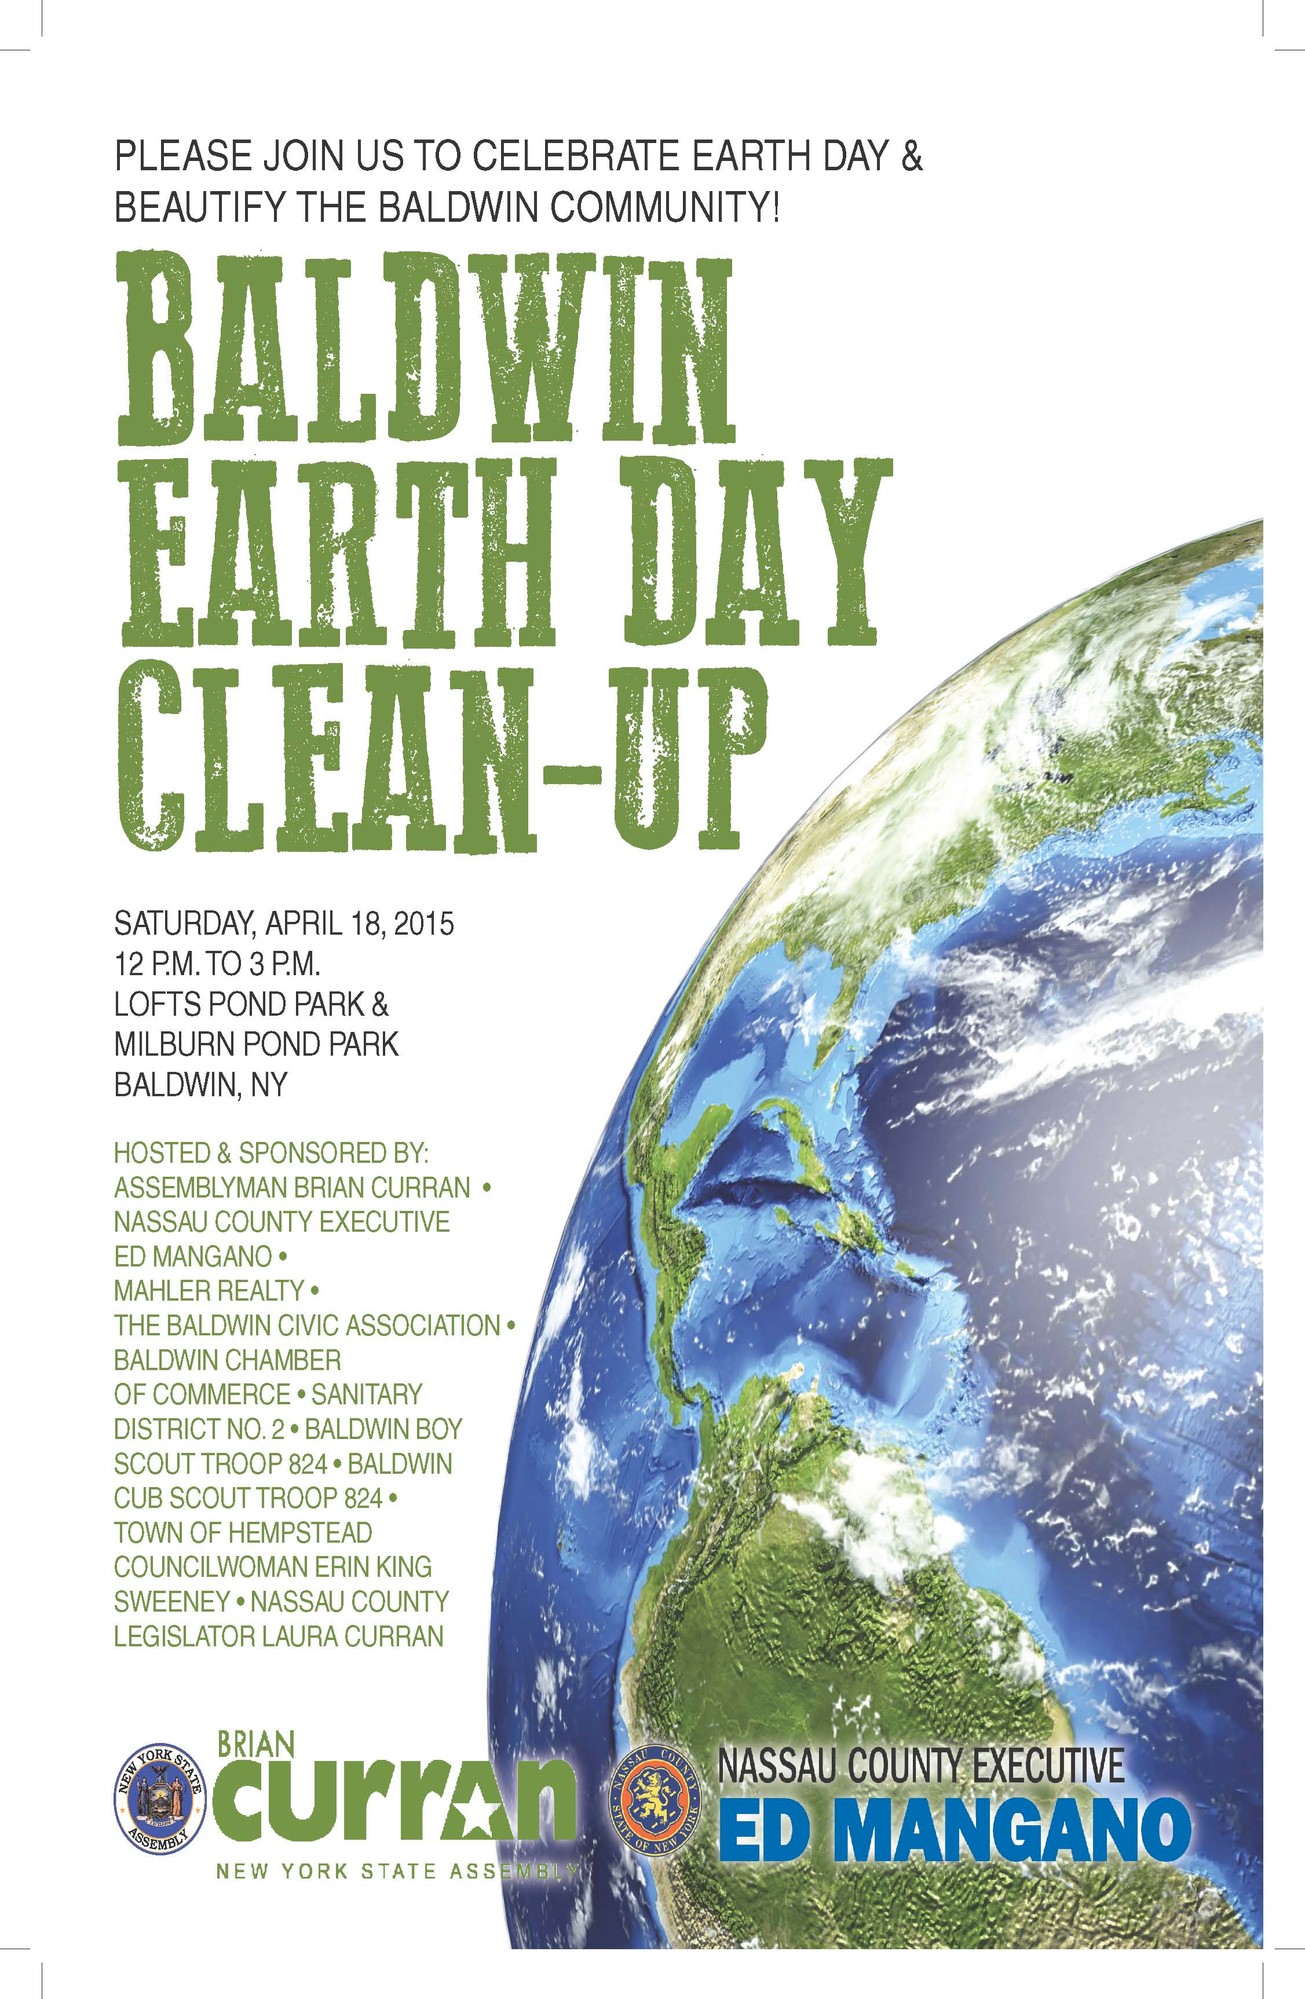 The Earth Day cleanup at Lofts Pond and Milburn Pond parks will take place on Saturday from noon to 3 p.m.